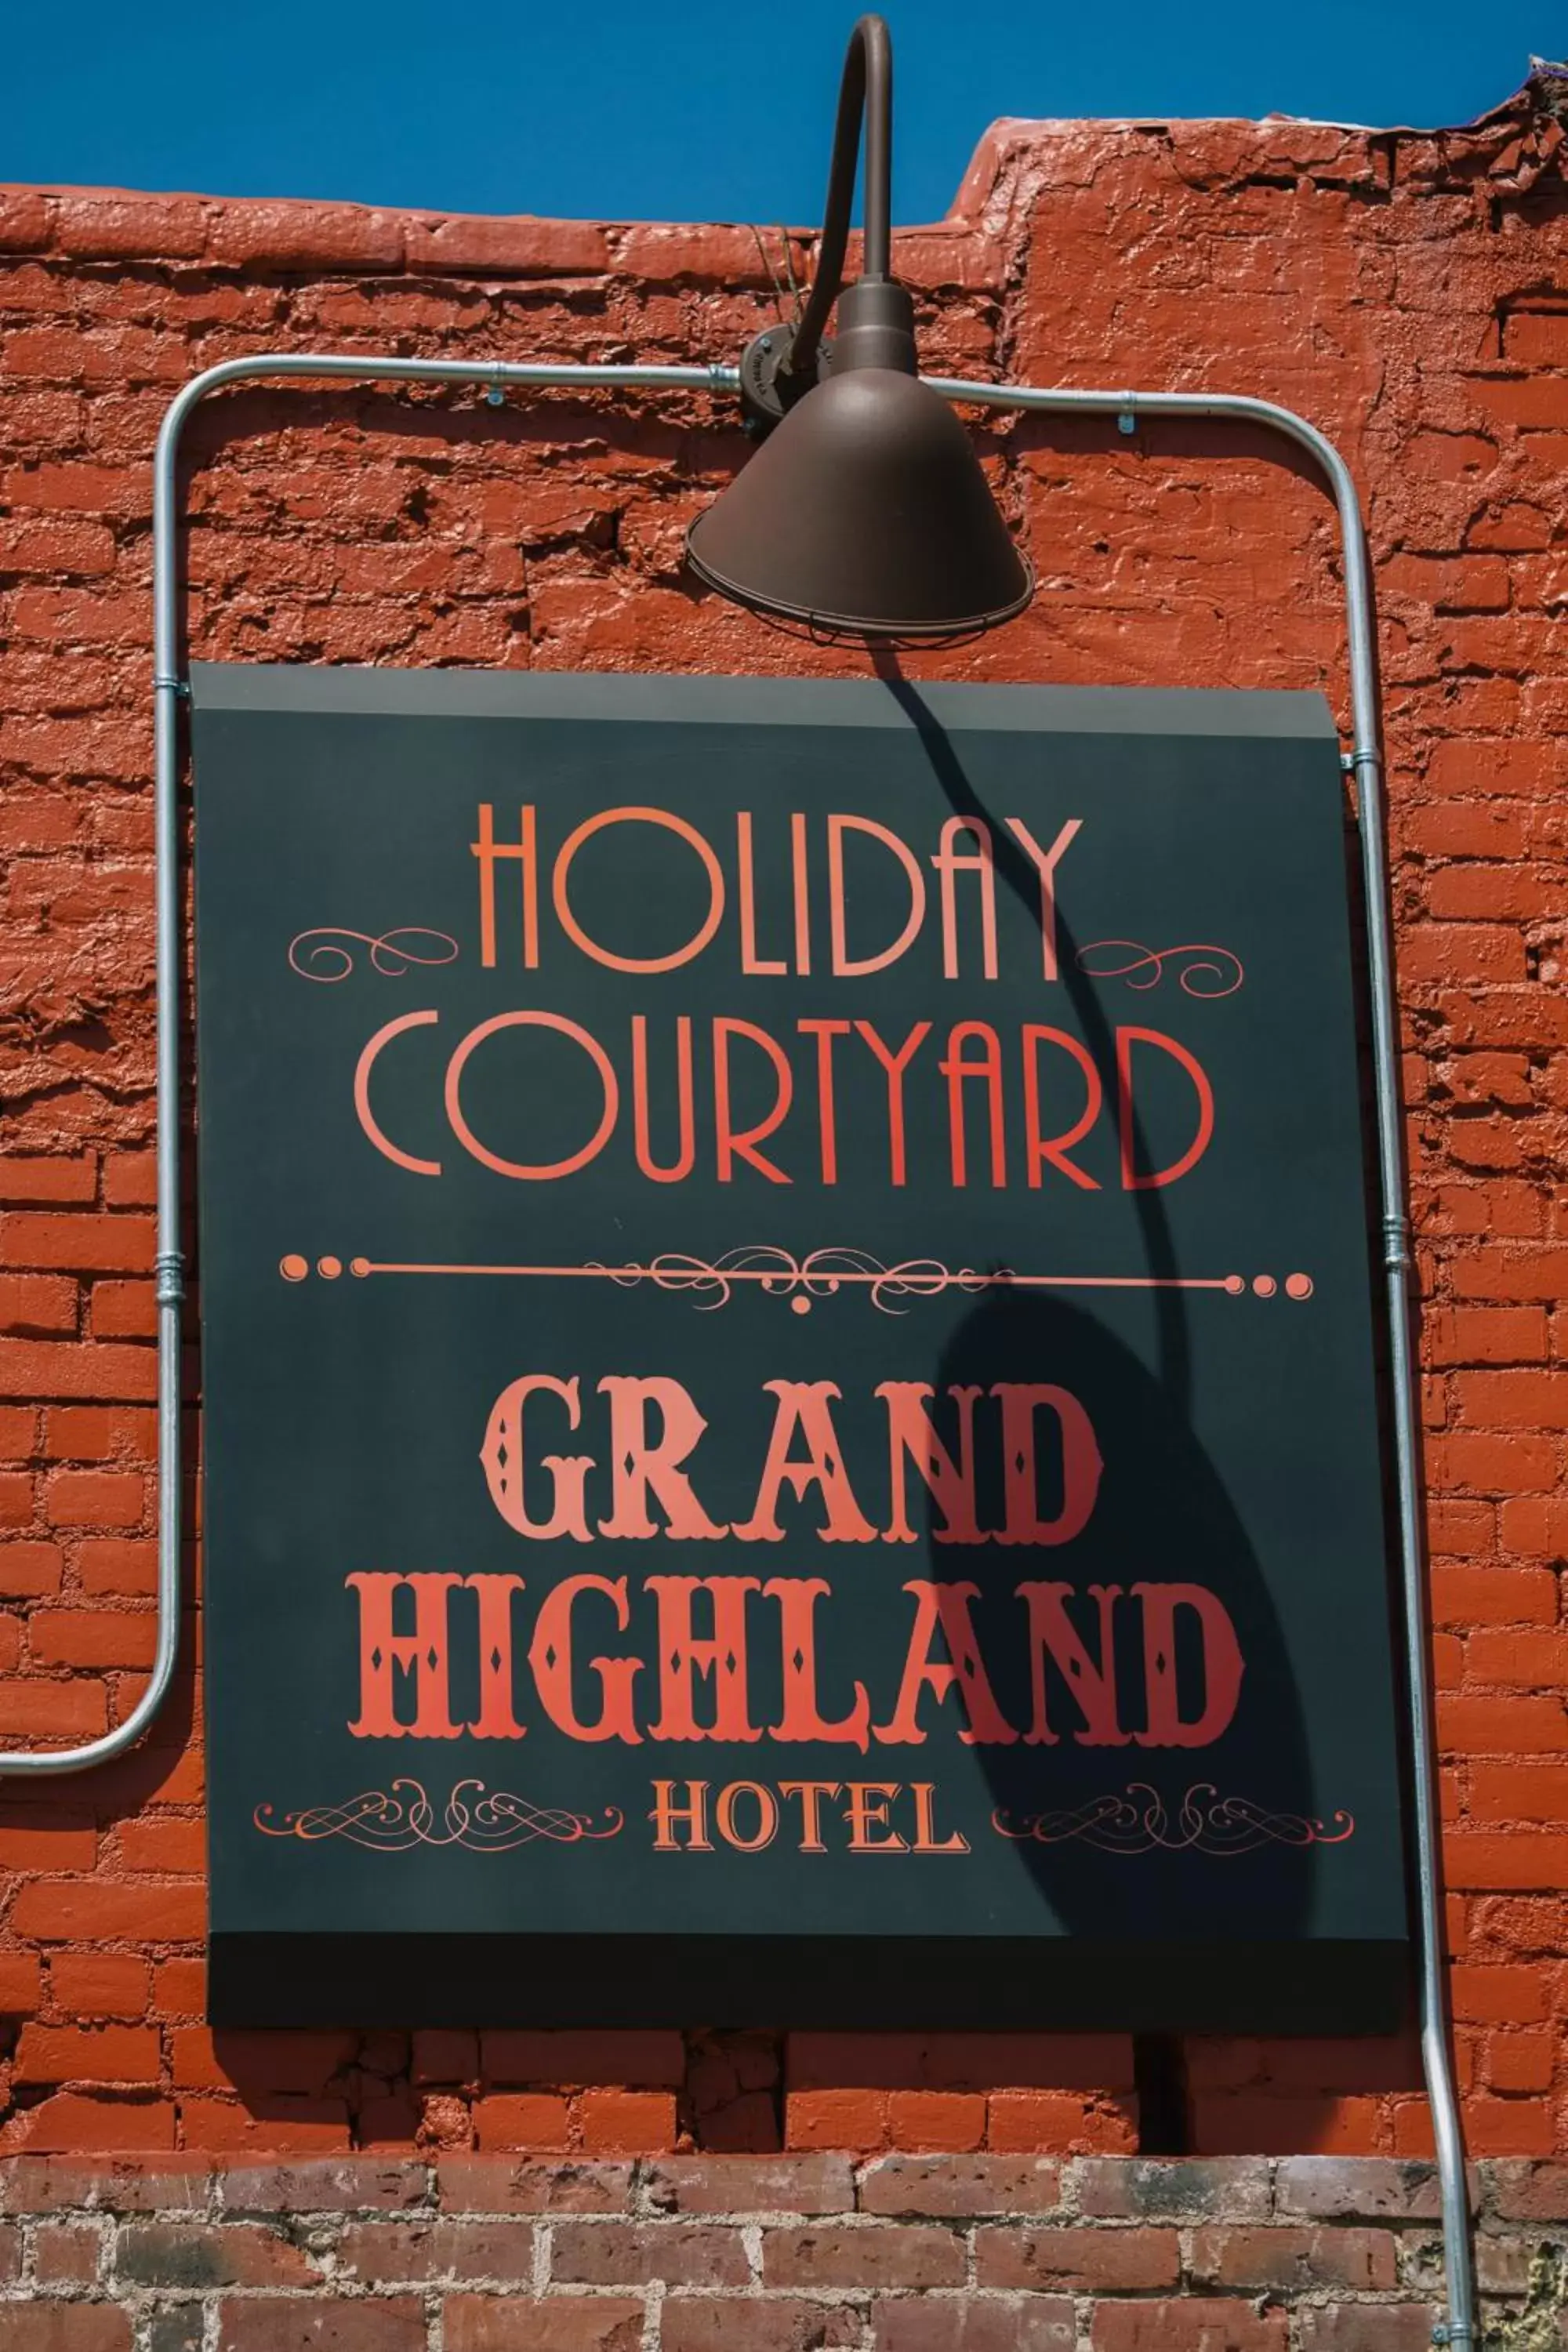 Property logo or sign in Grand Highland Hotel